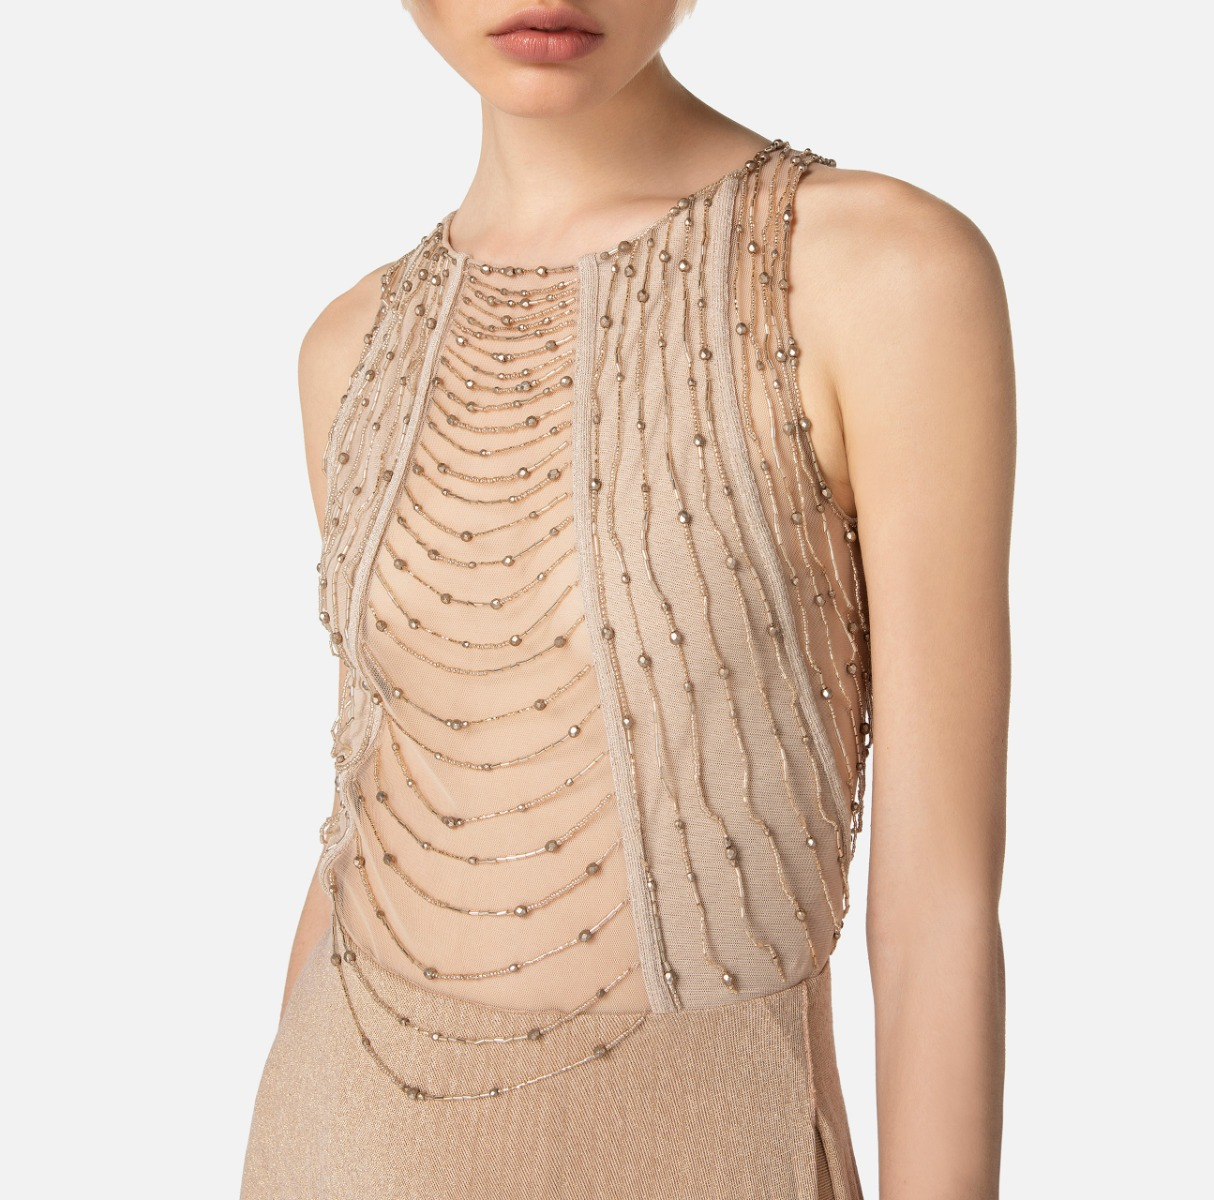 Red Carpet dress in embroidered tulle and jersey - Elisabetta Franchi